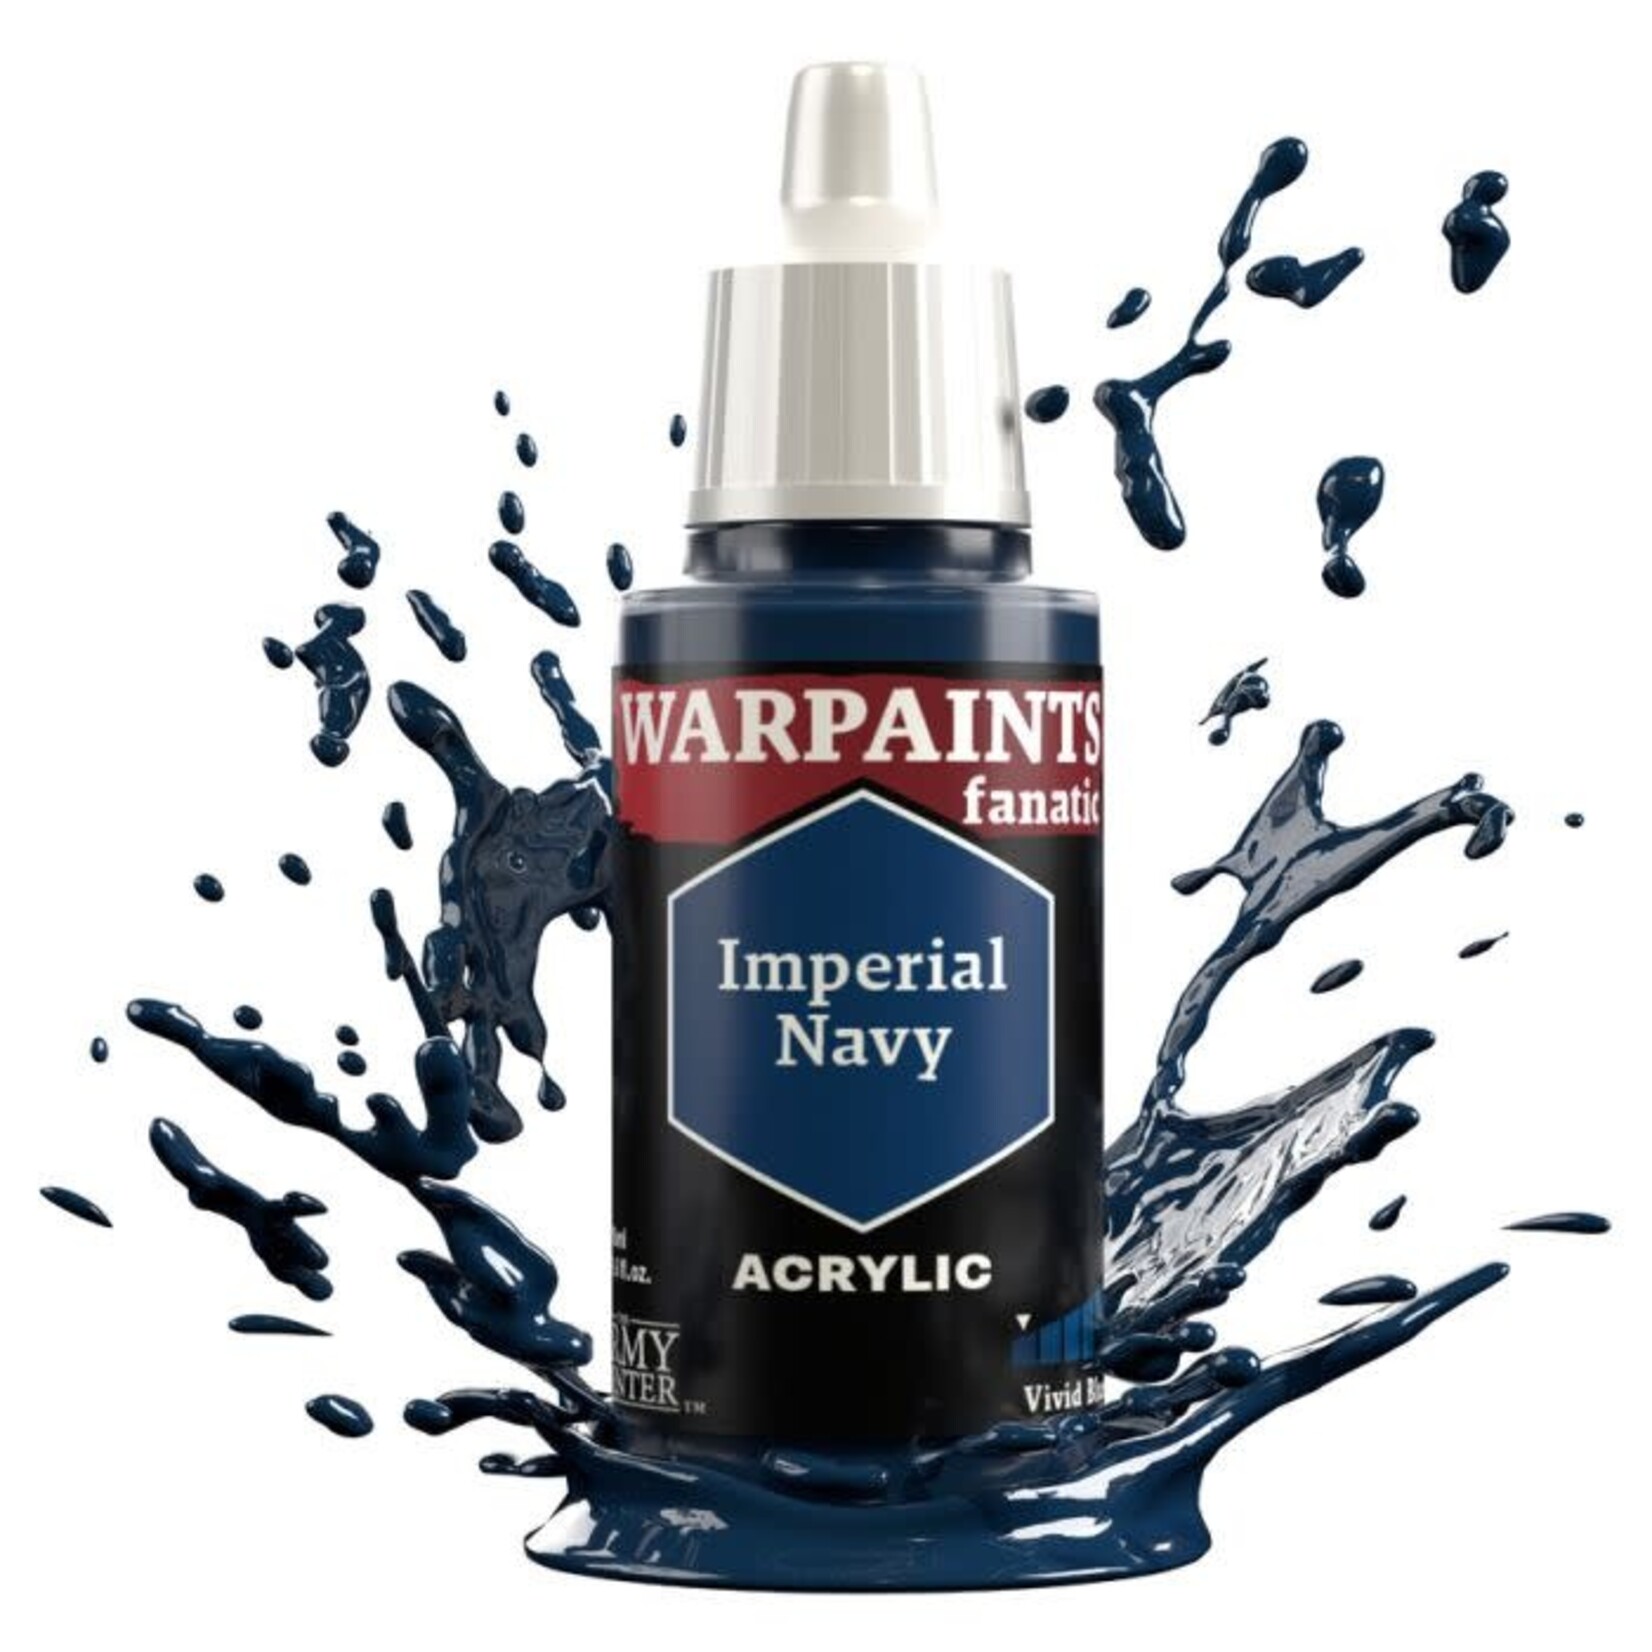 The Army Painter The Army Painter Warpaints Fanatic Fanatic Imperial Navy 18ml